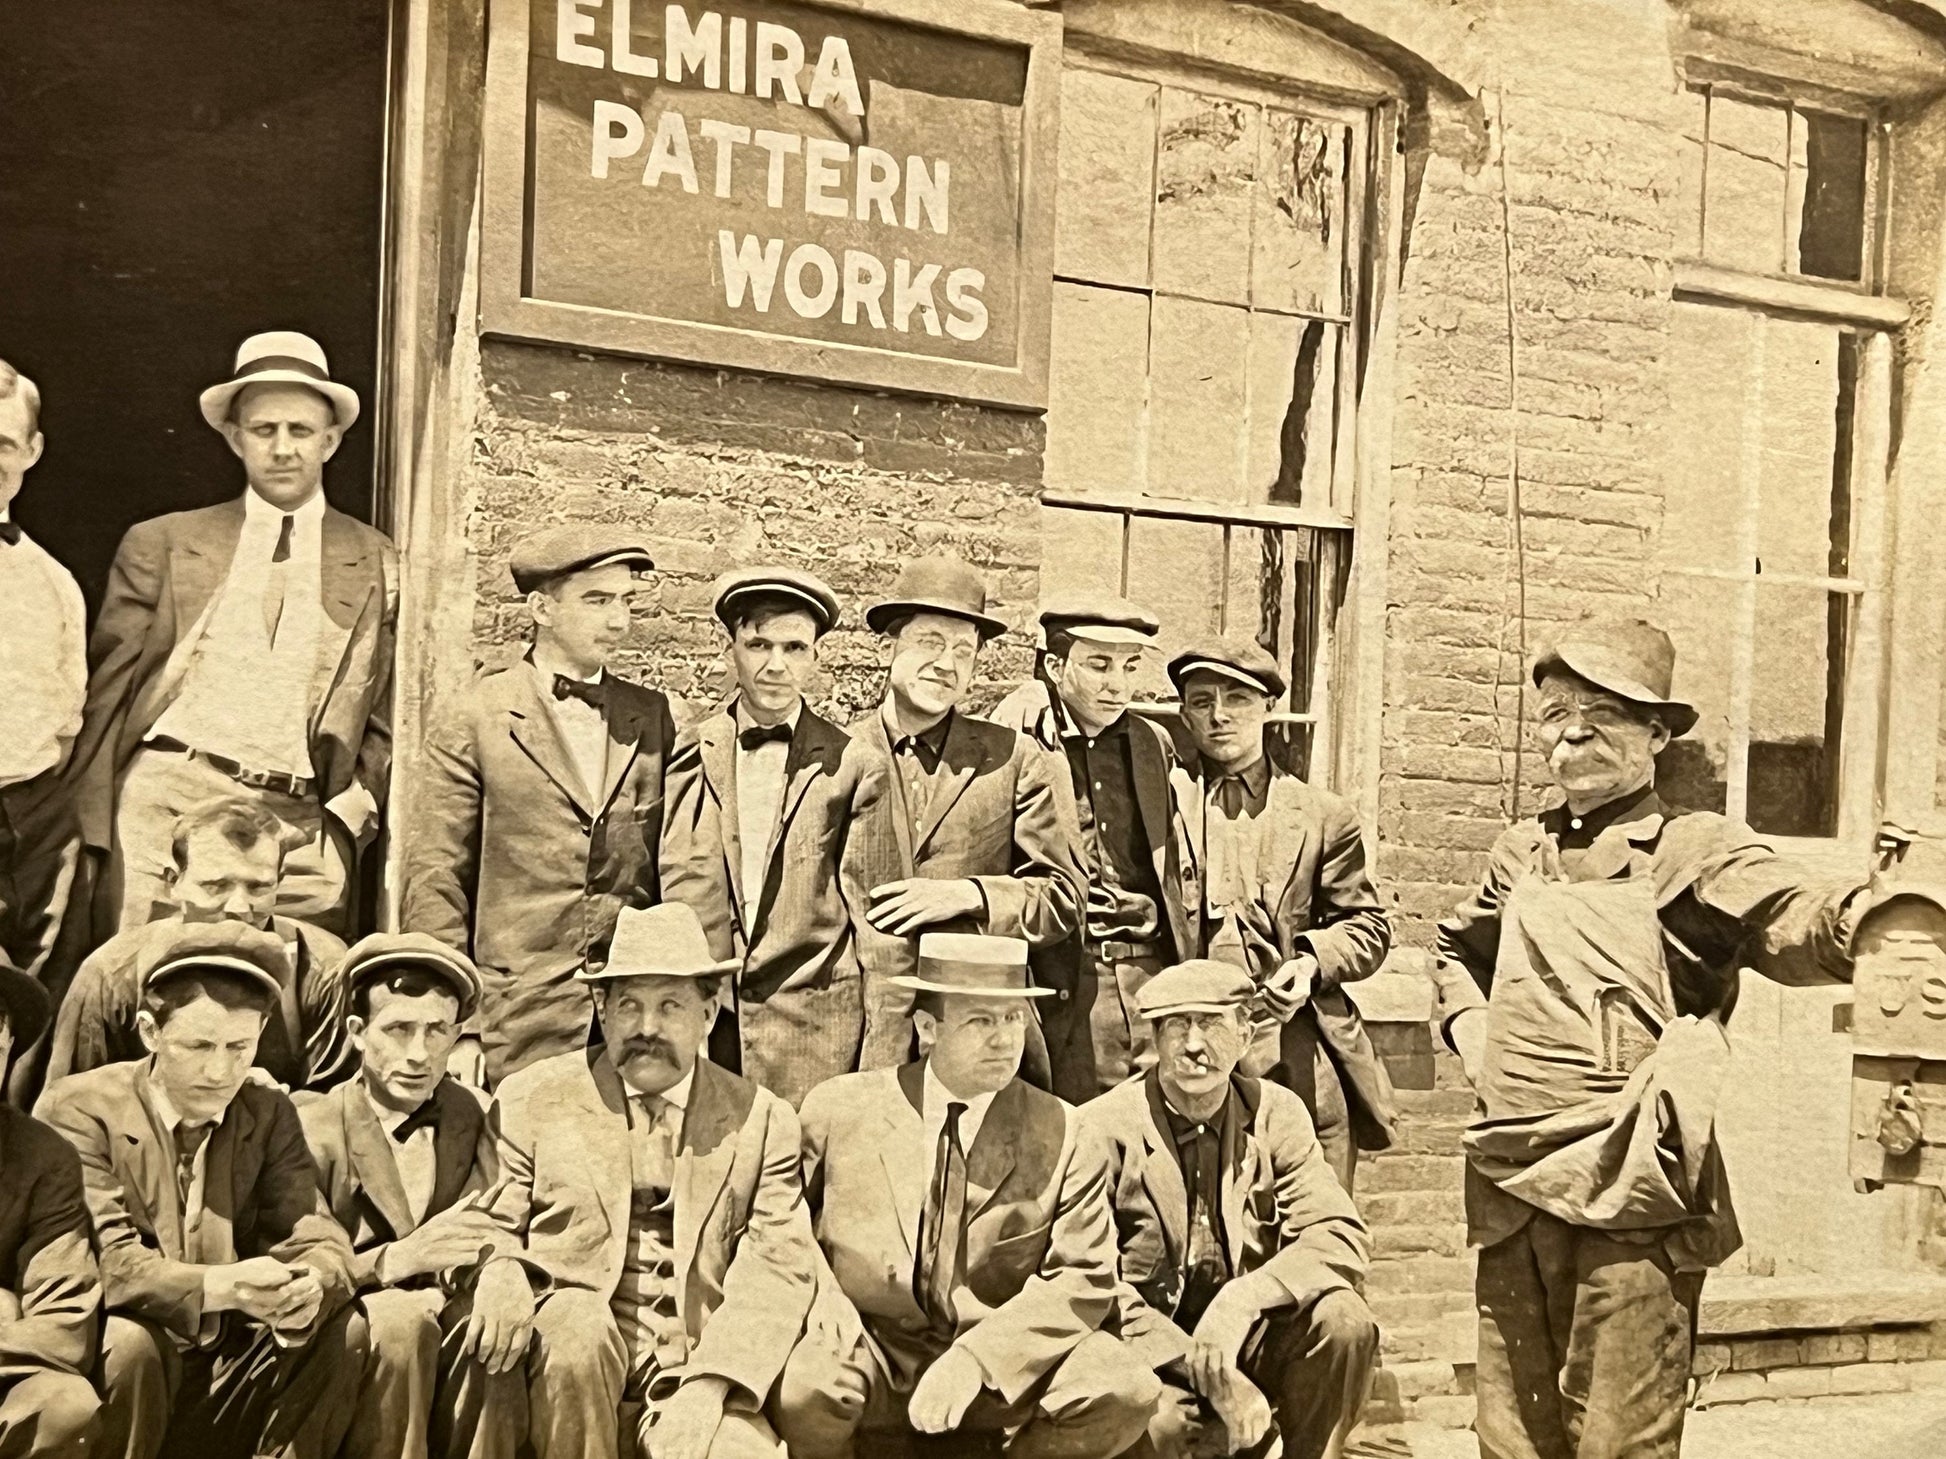 Antique photo real photo postcard rppc occupational Elmira pattern works factory workers New York 1900s